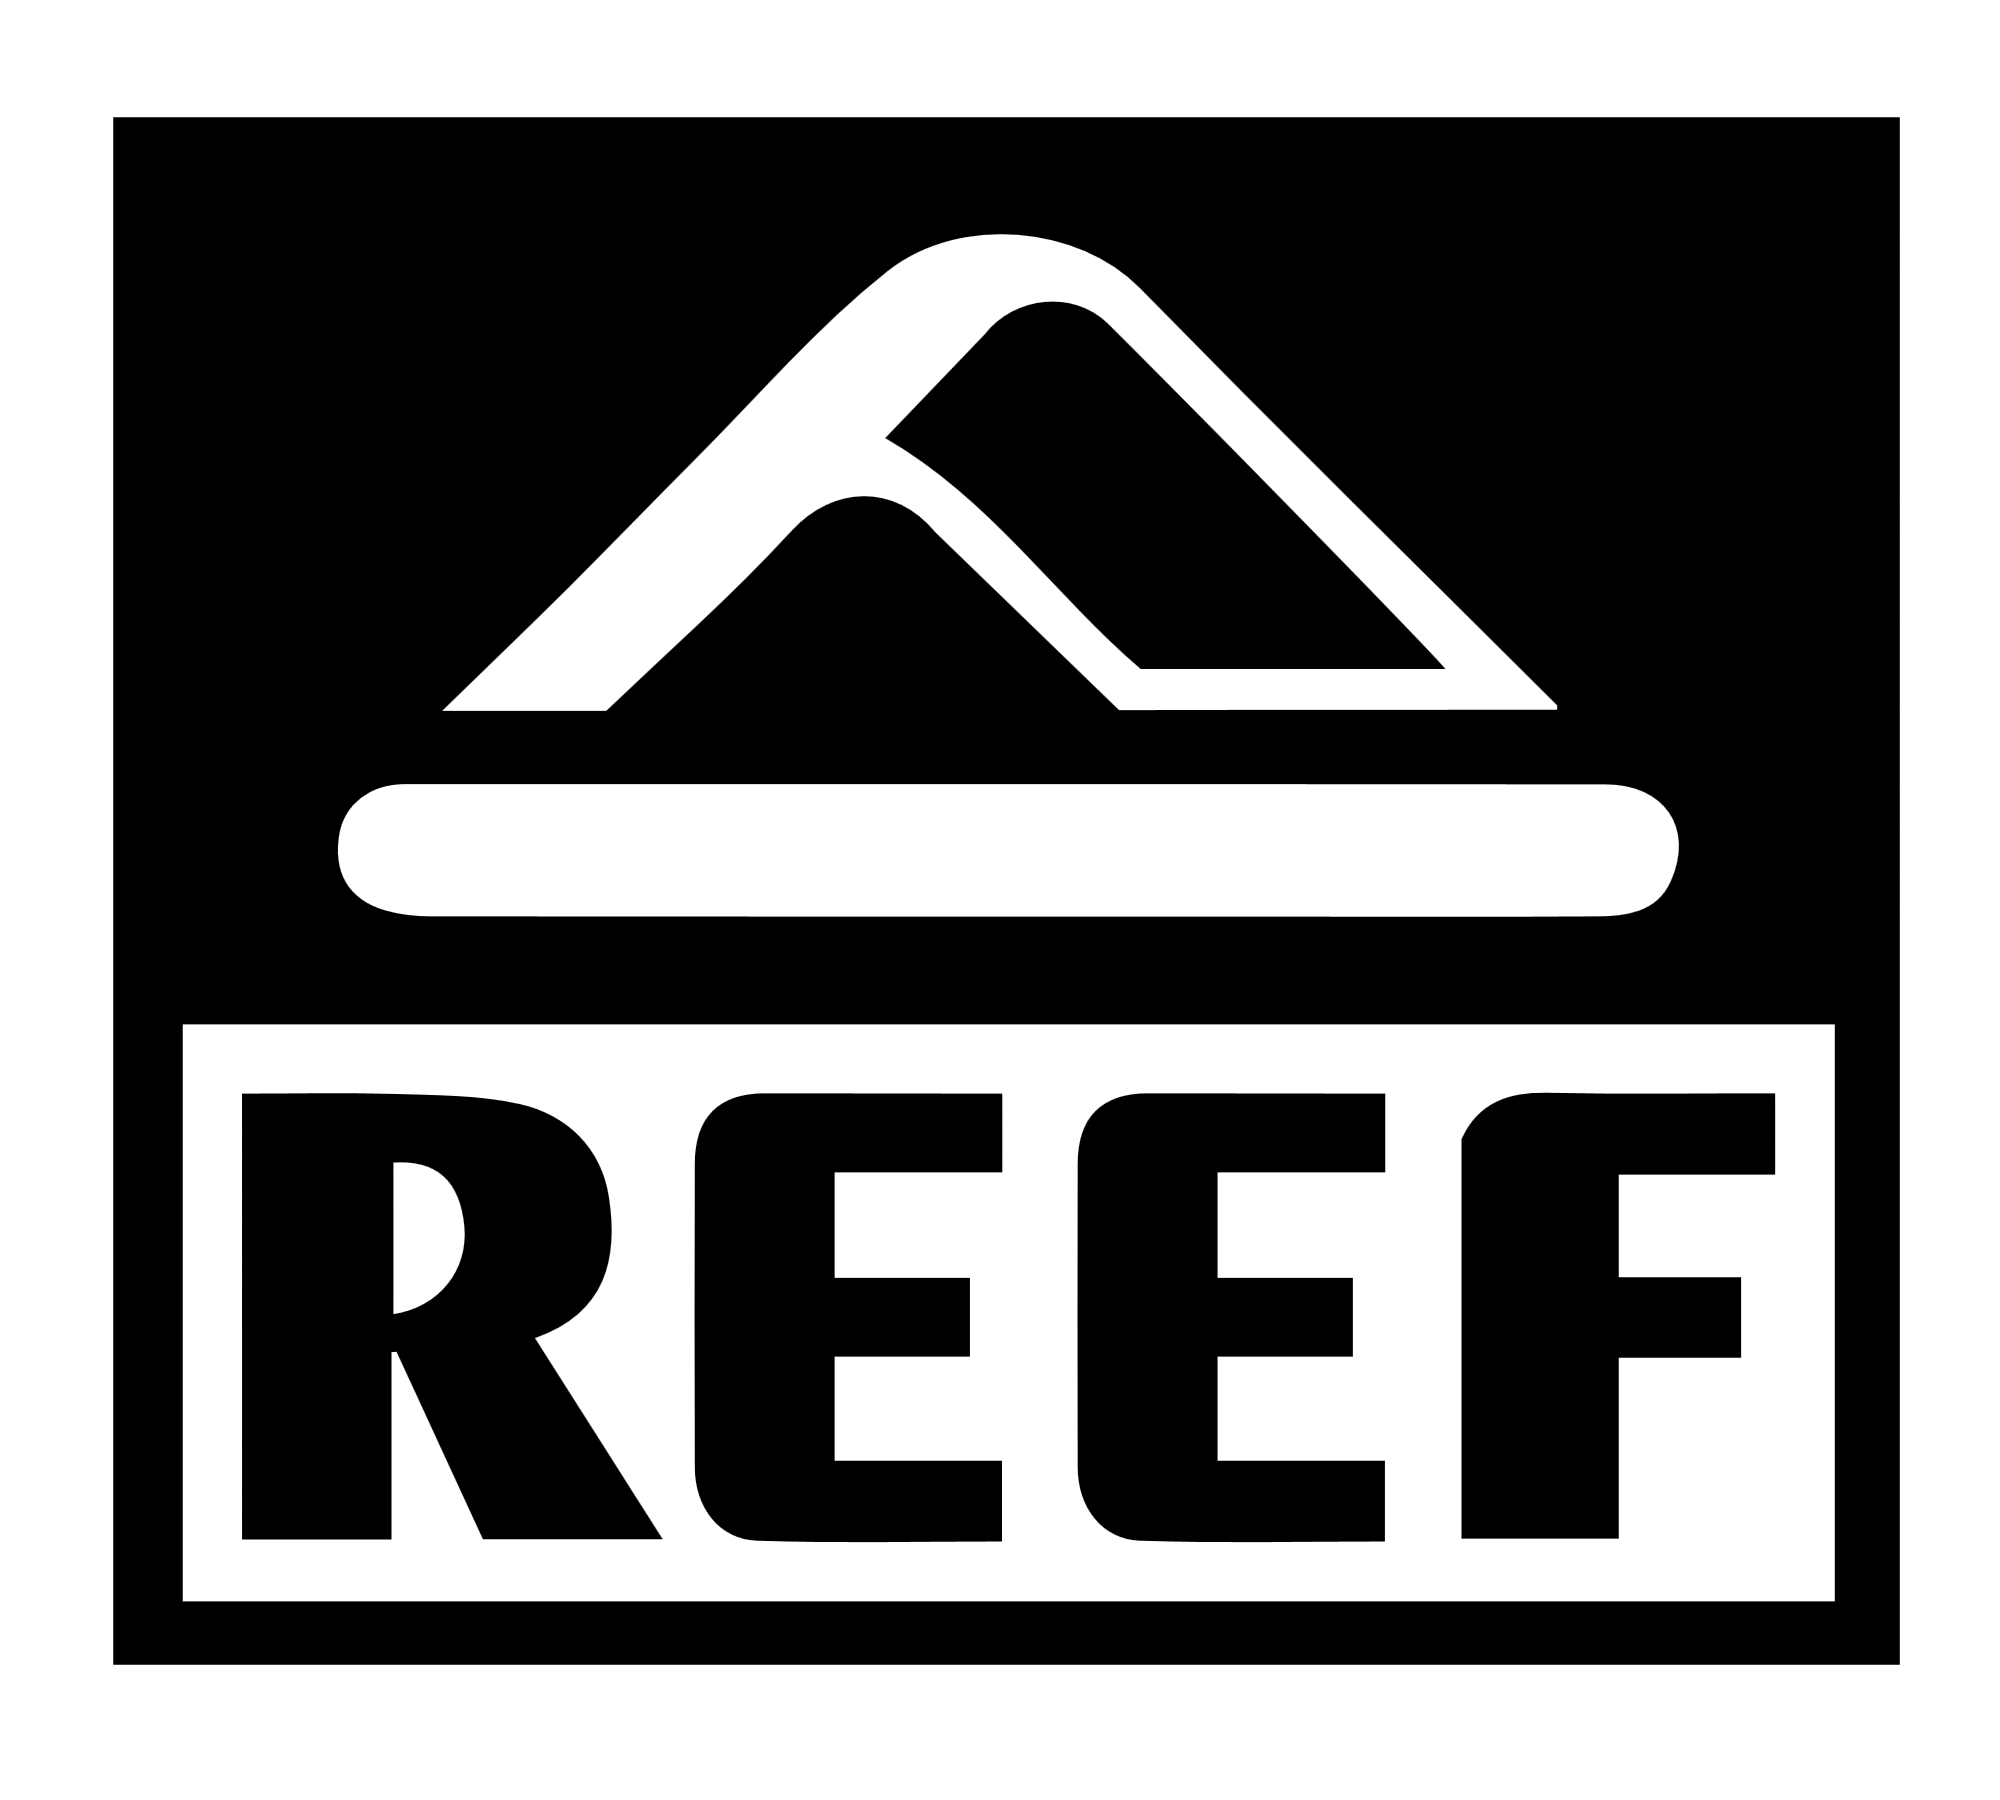 Reef Coupons & Promo Codes